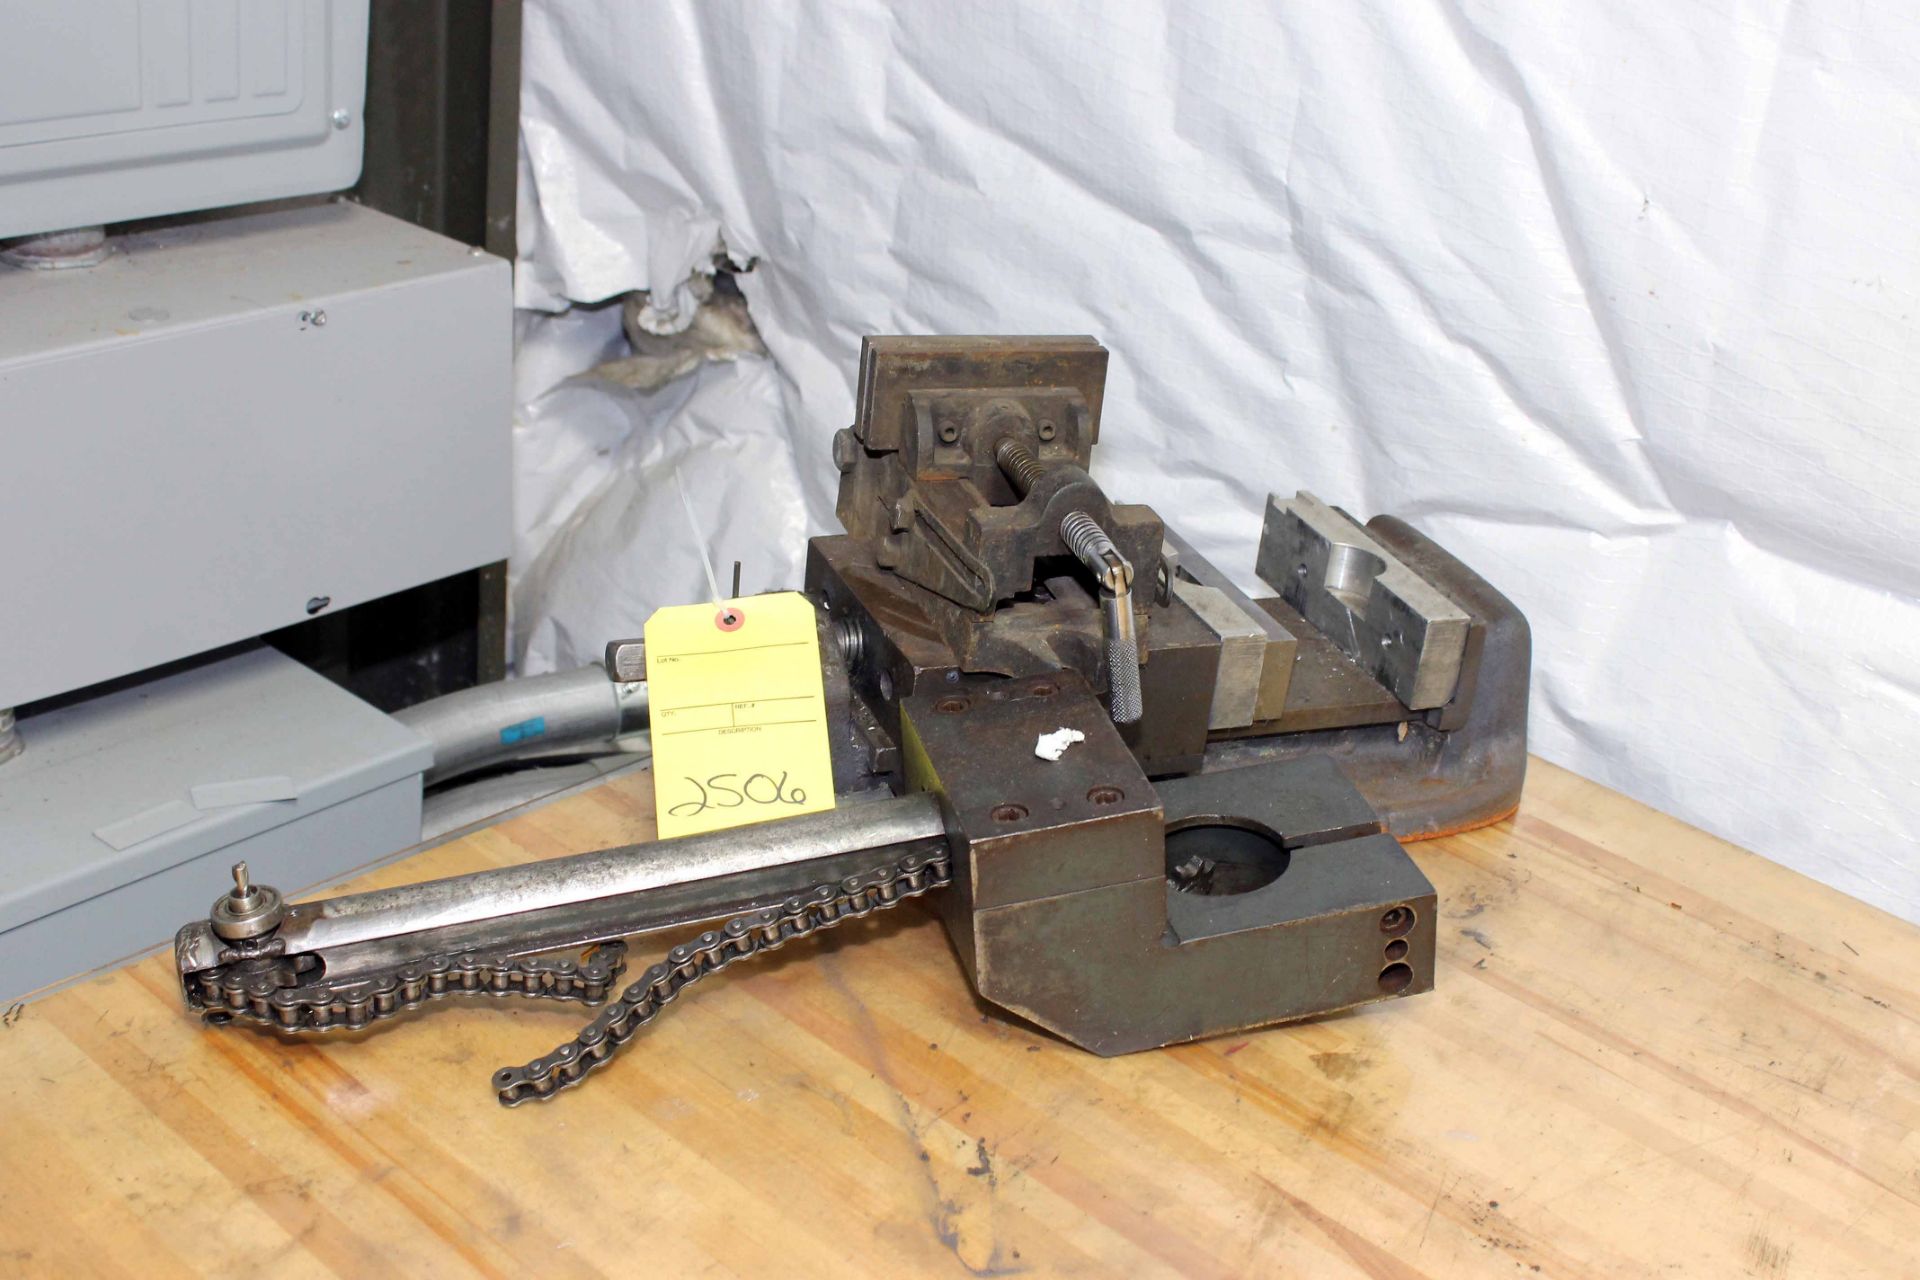 LOT CONSISTING OF BRIDGEPORT MACHINE VISE, SMALL VISE, RIGHT ANGLE ATTACHMENT, assorted